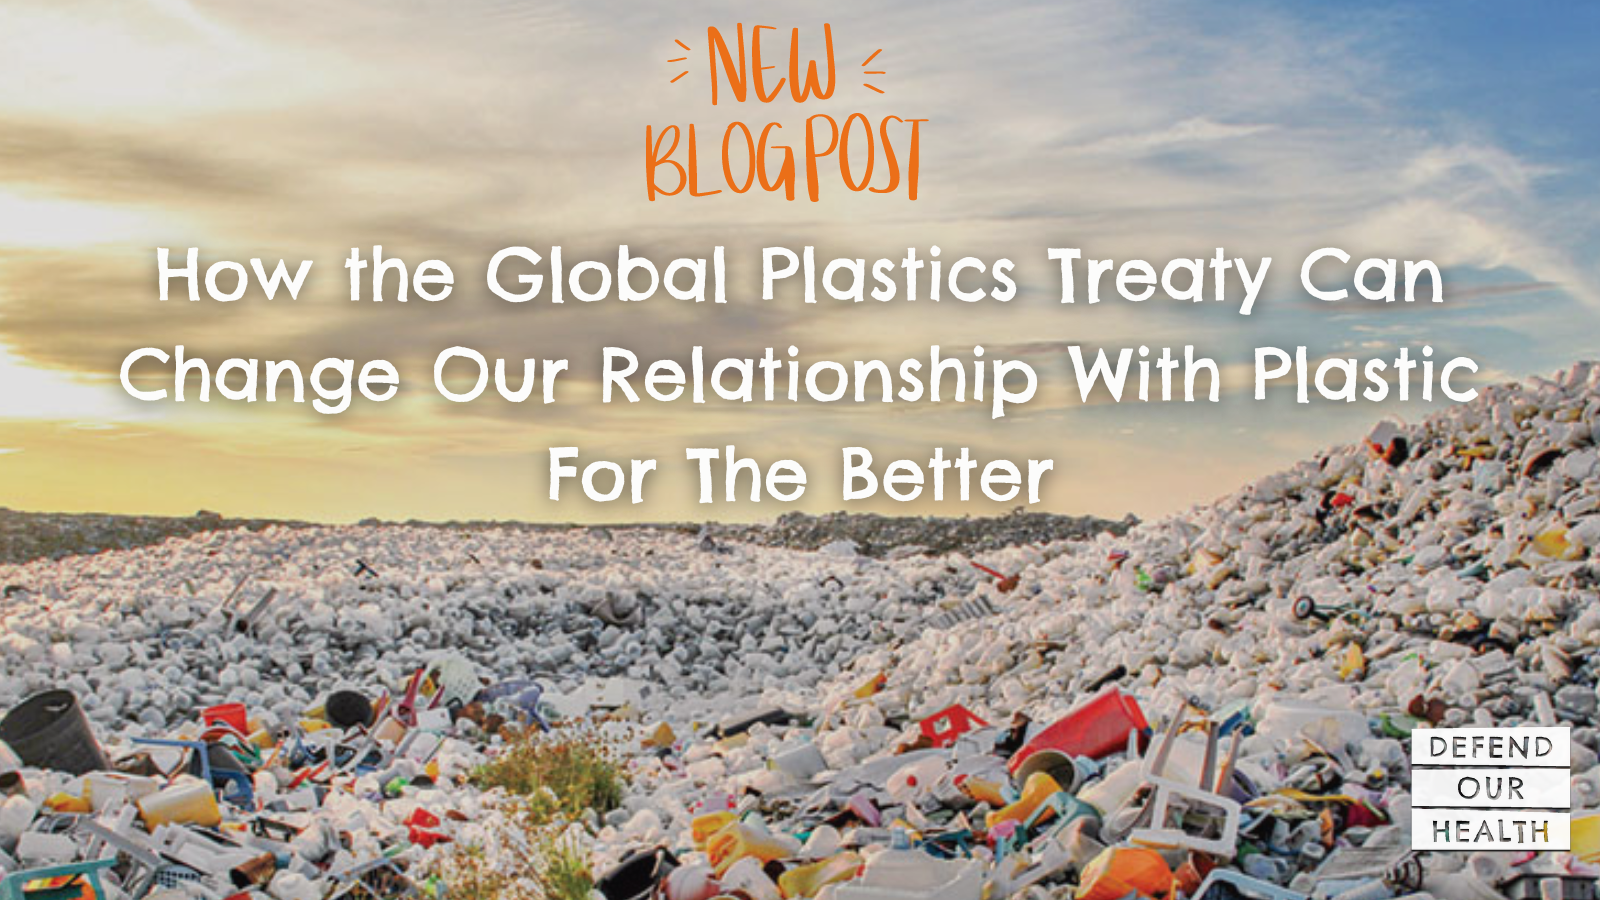 How the Global Plastics Treaty Can Change Our Relationship With Plastic